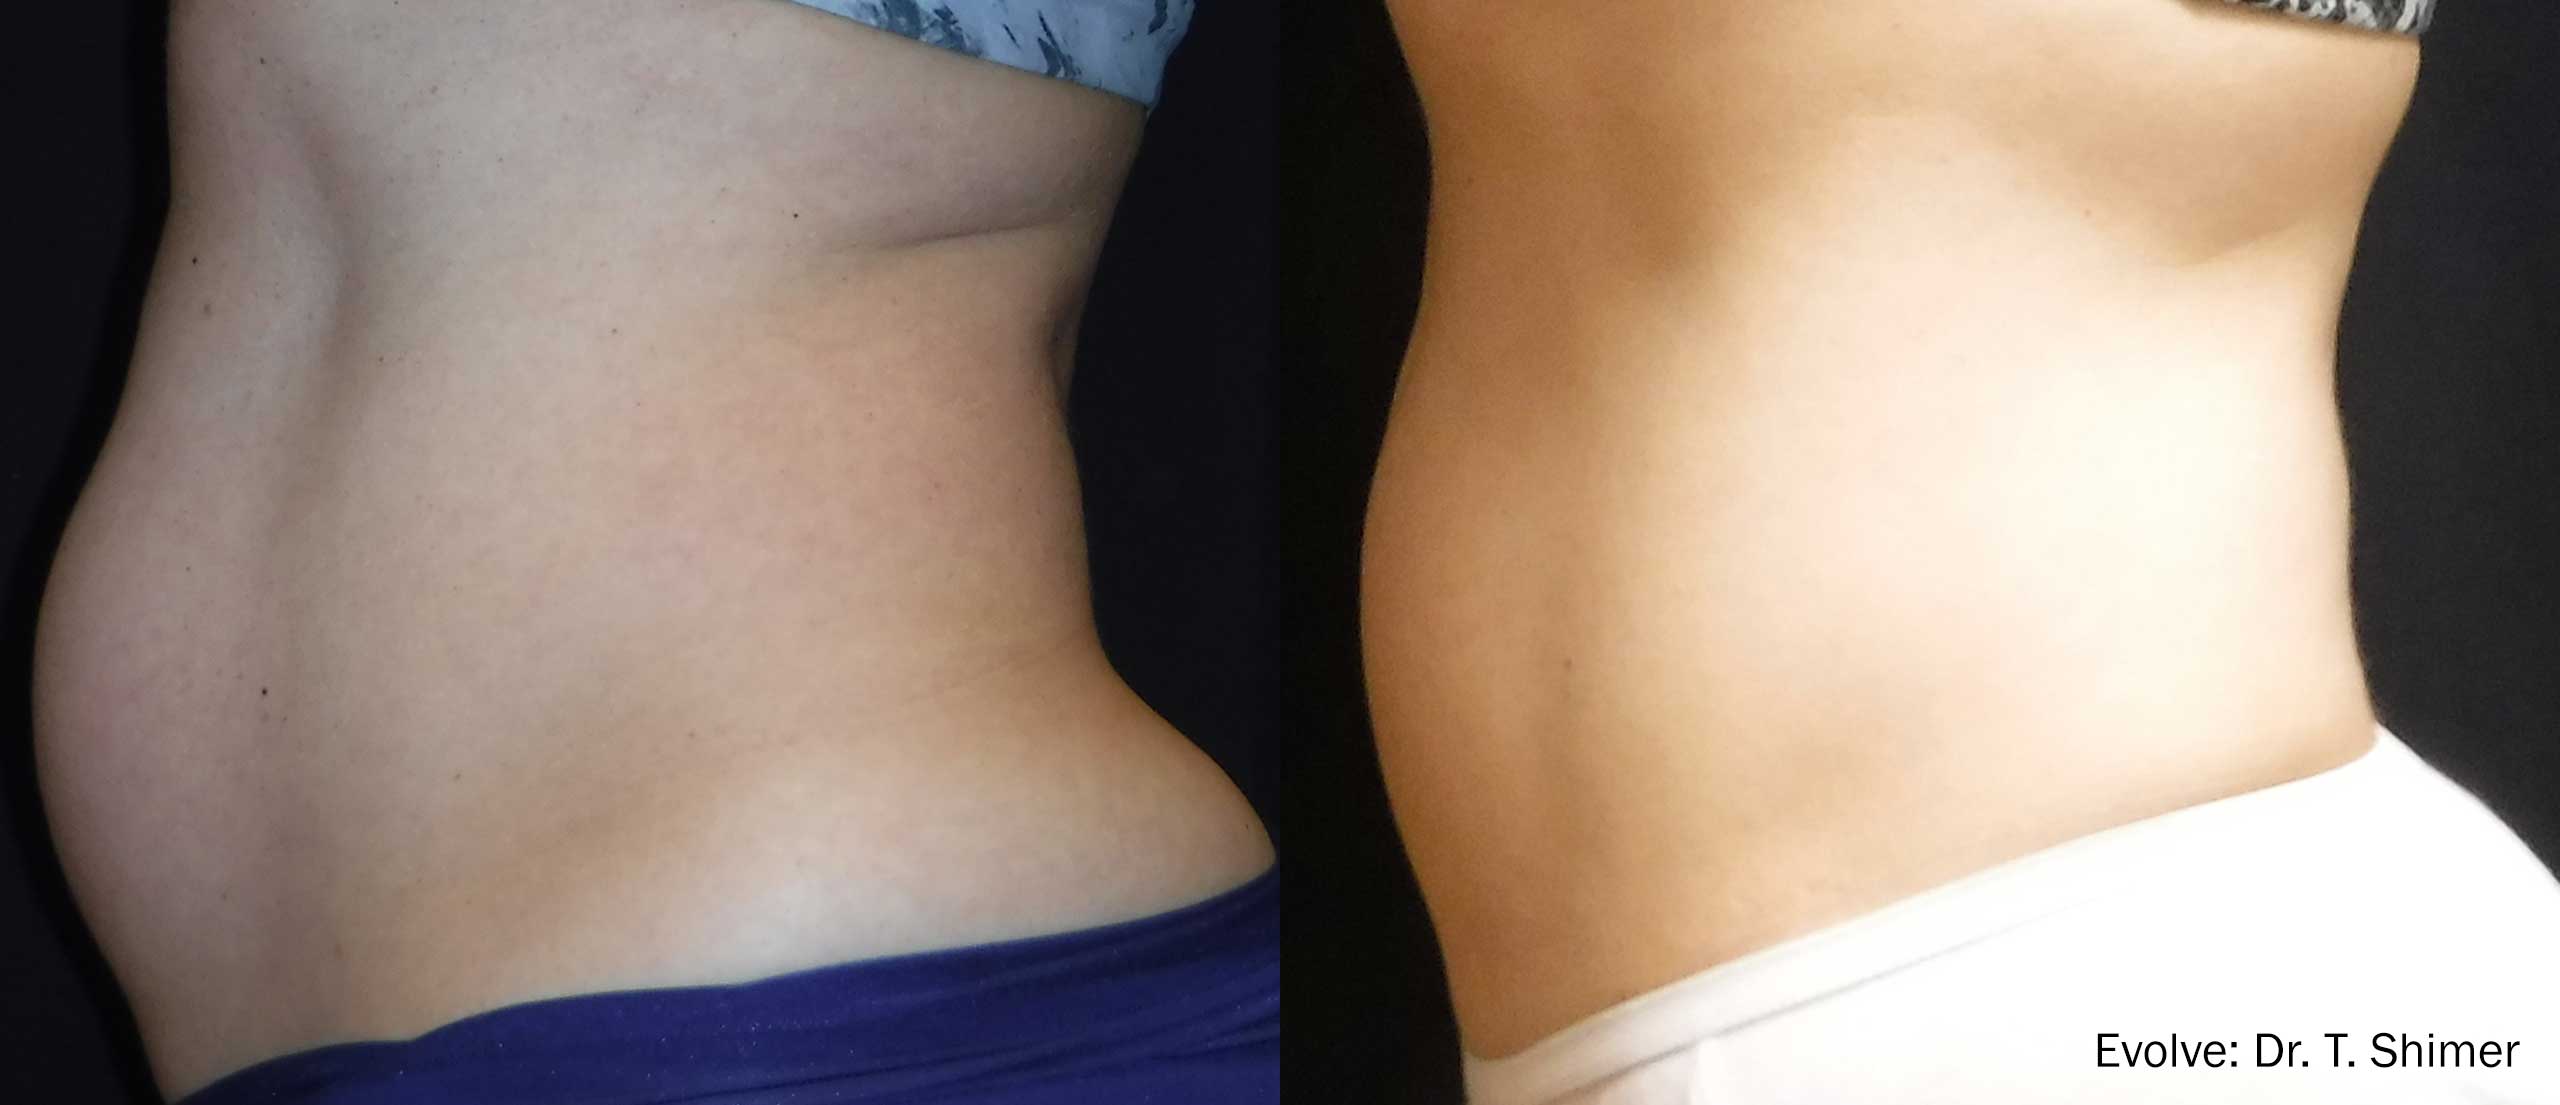 Evolve Treatment Before & After